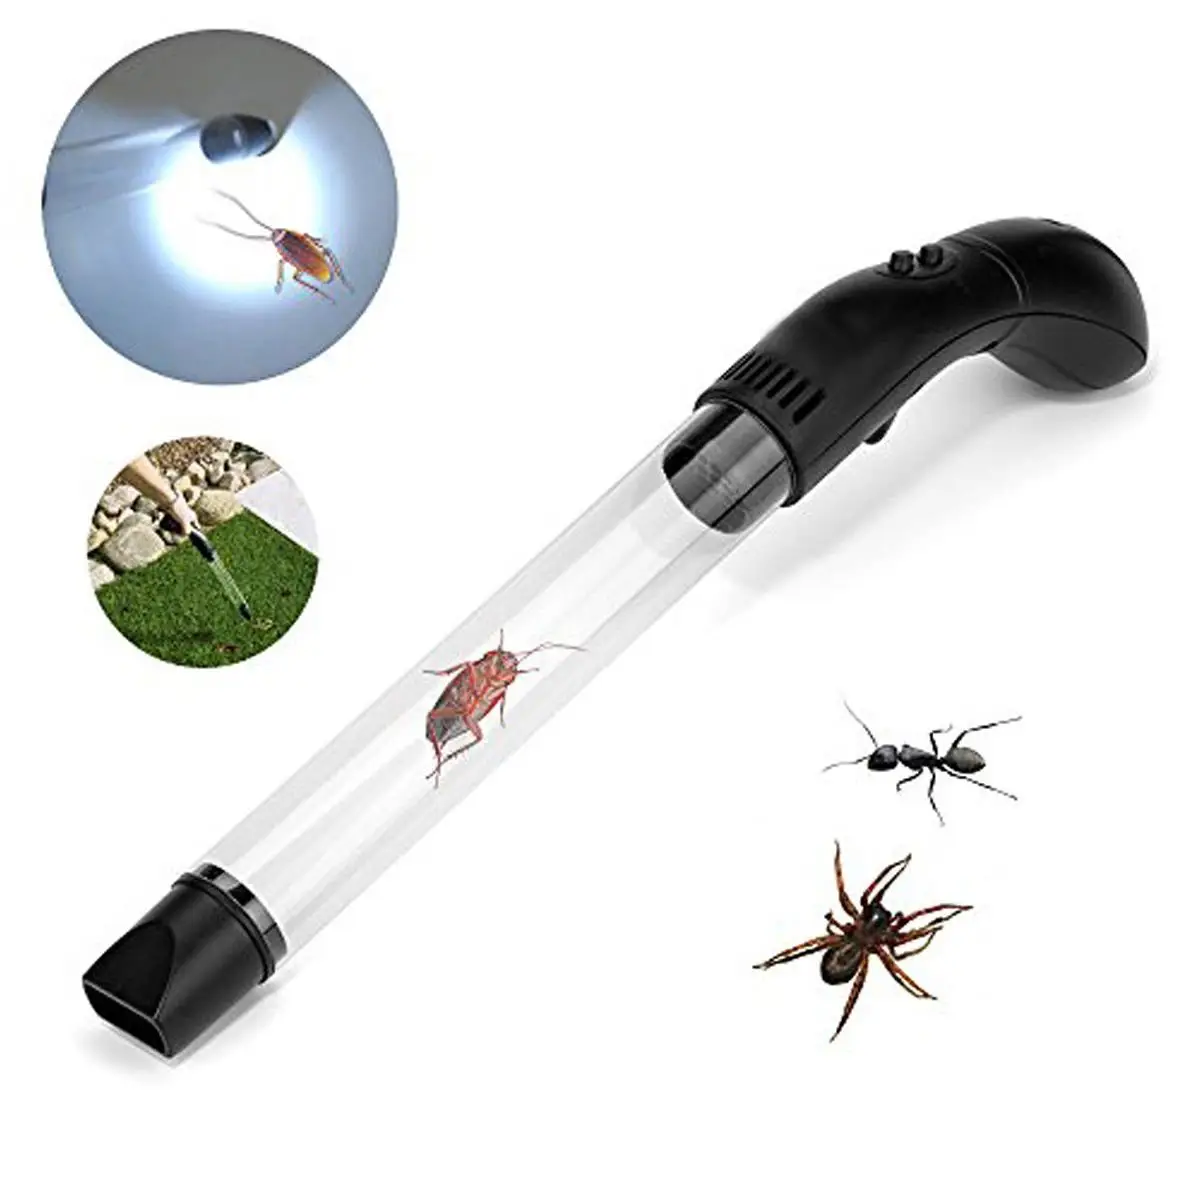 GH-200C indoor and outdoor insect and bug catcher+USB recharger & fly trap pest animal control traps